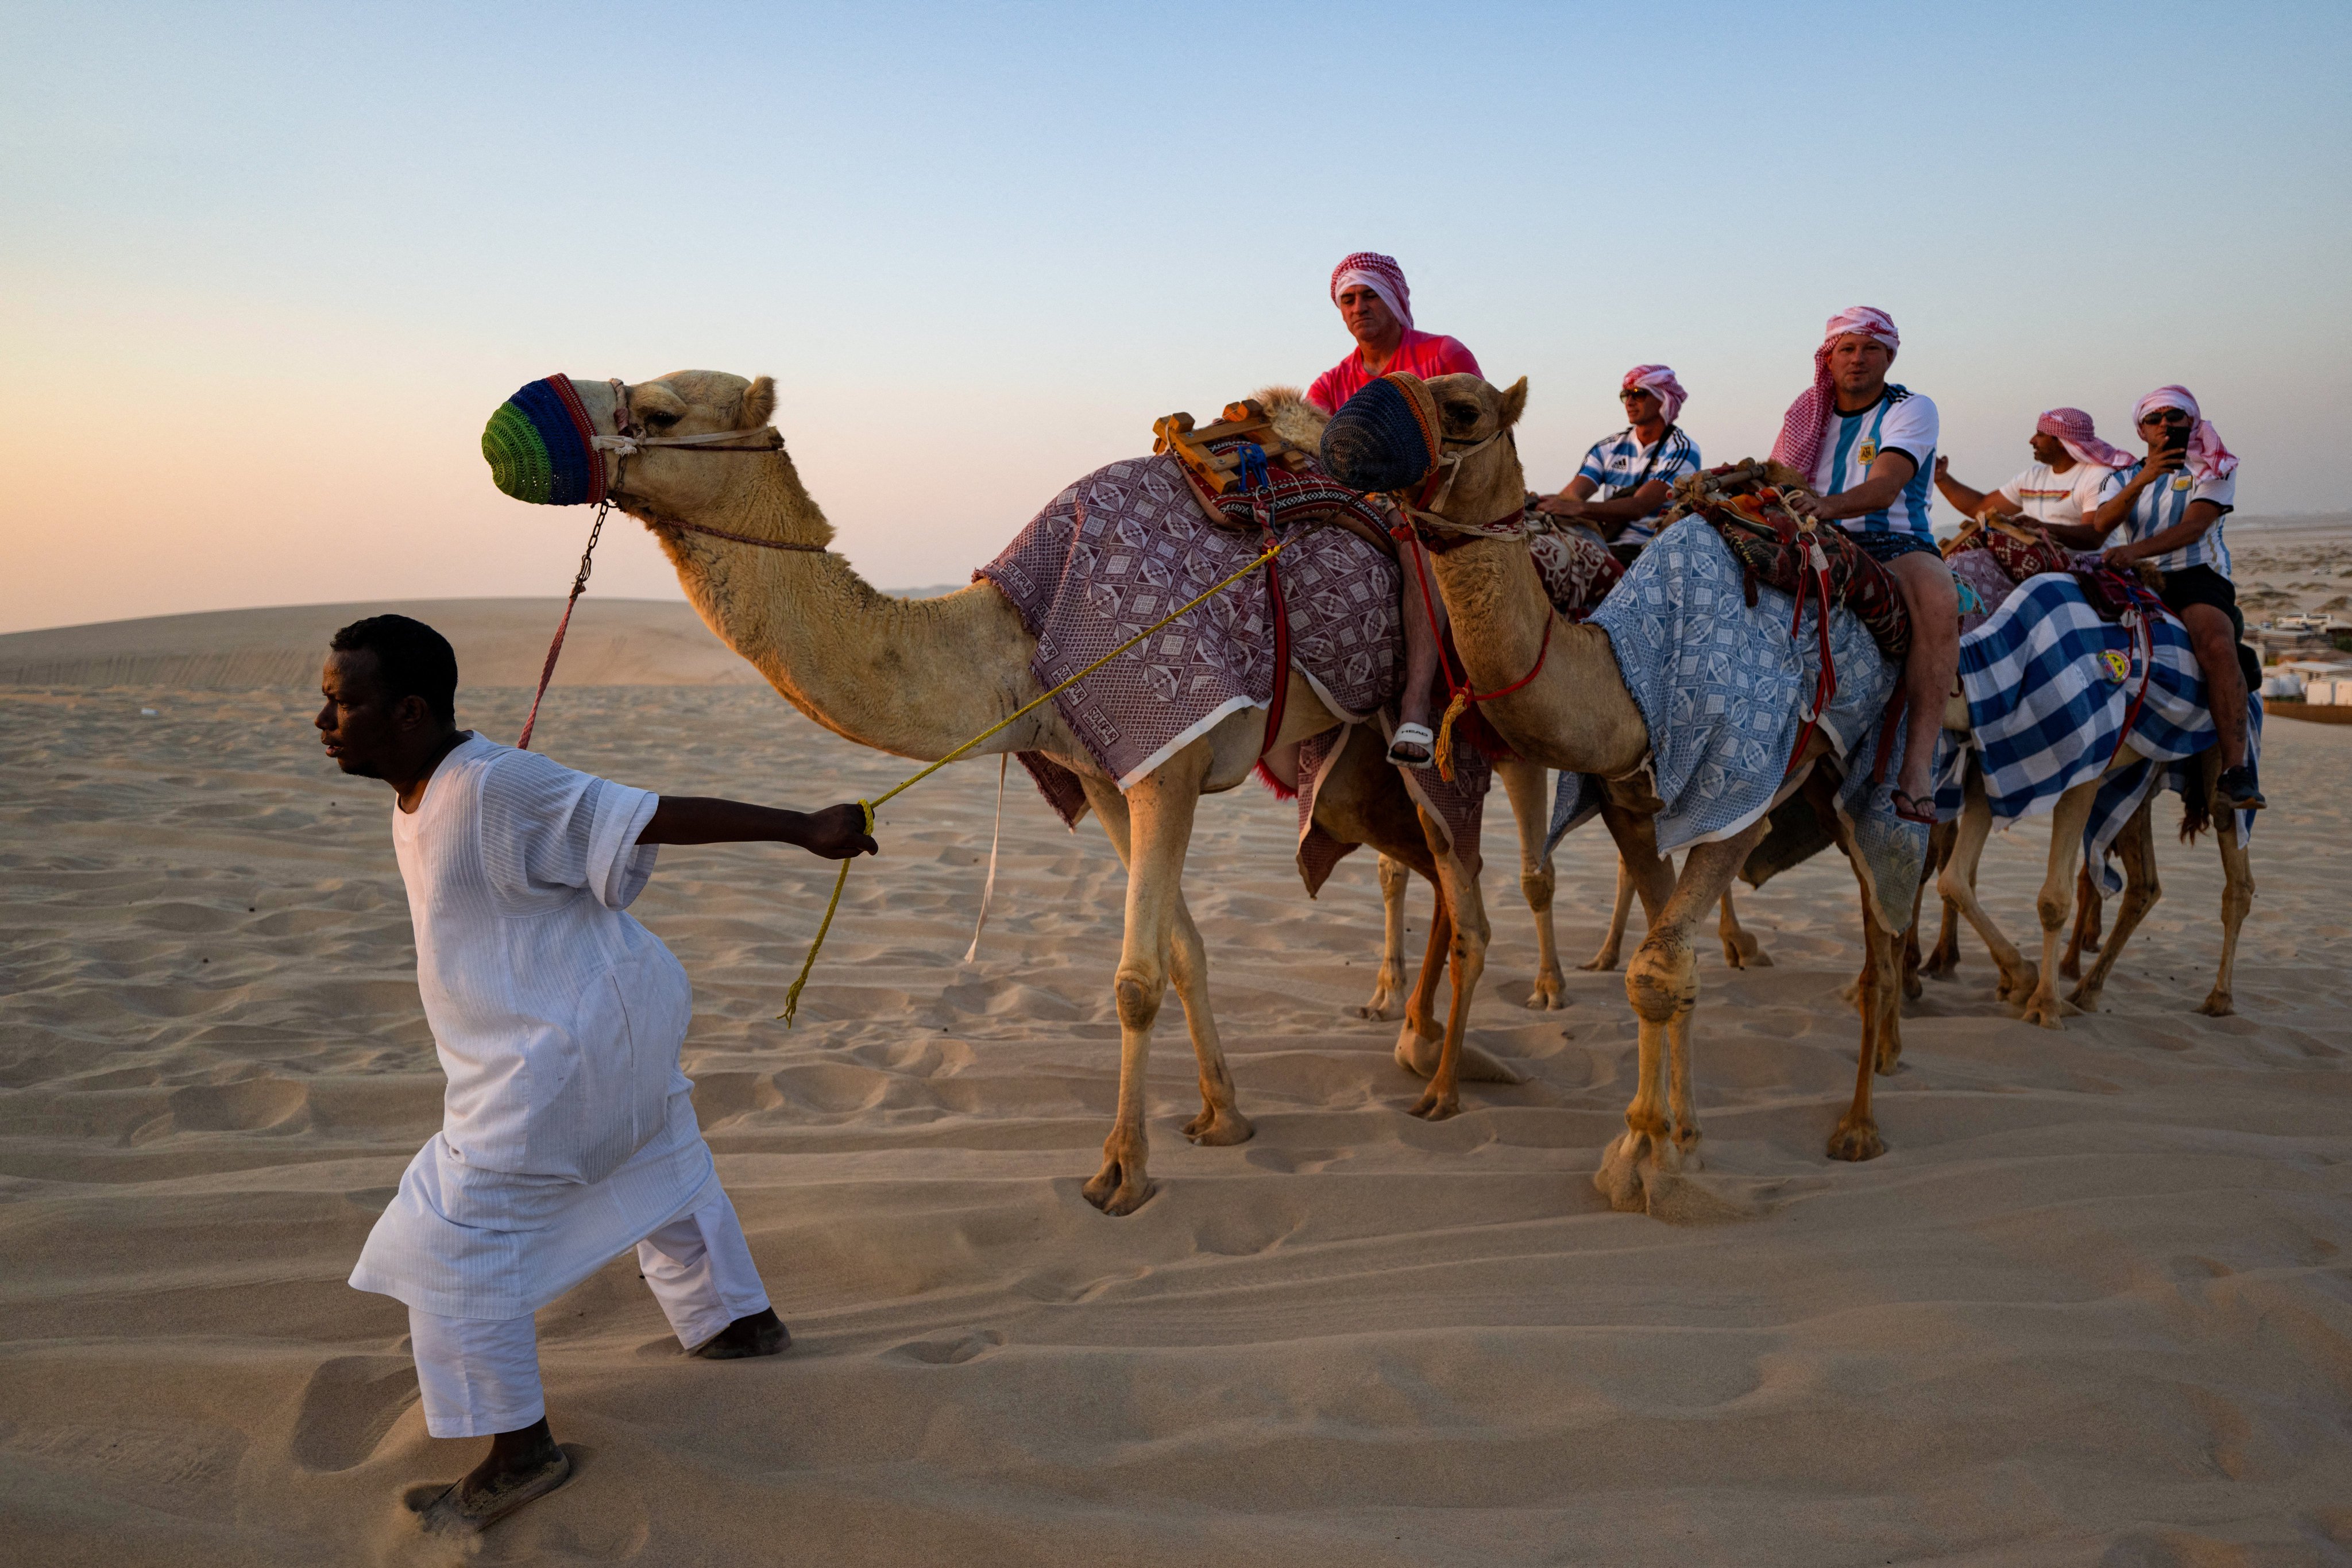 Tourists ride camels in a desert near Doha during the 2022 World Cup tournament. Photo: AFP